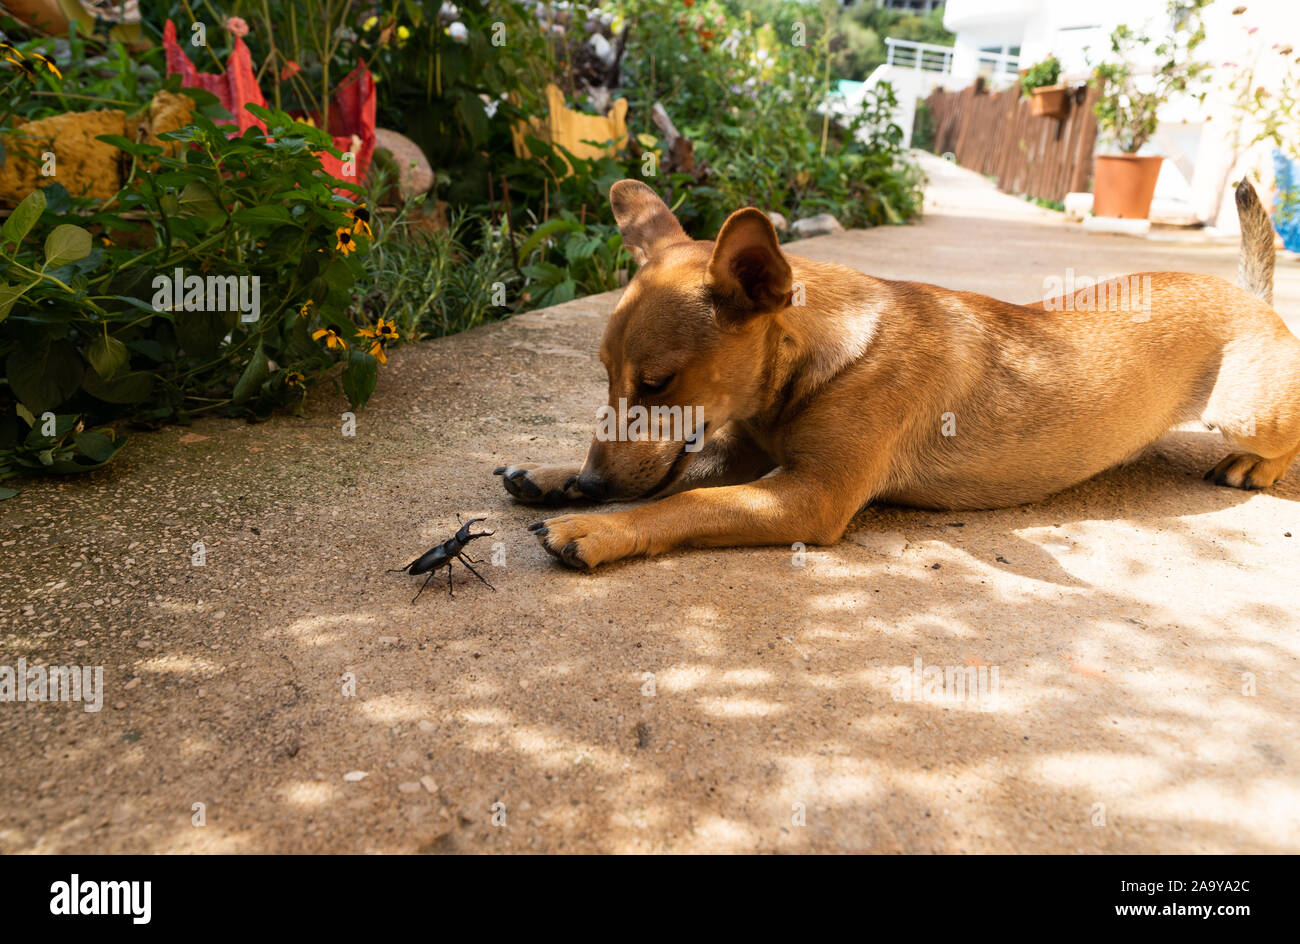 a cheeky stag-beetle attacks a funny dog. Funny scene. Big and small. Stock Photo